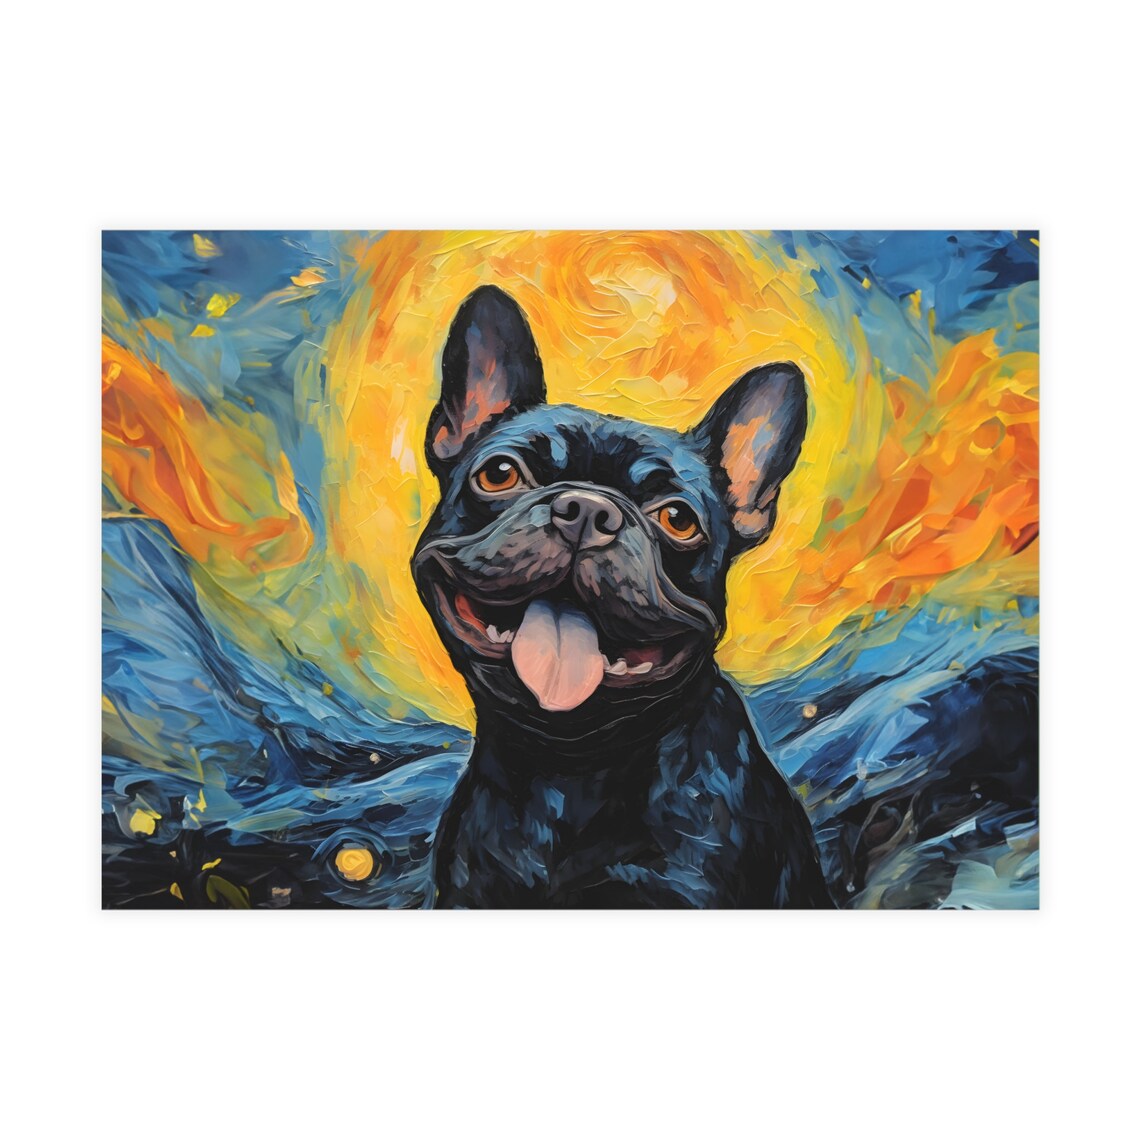 Let the adorable Frenchie take center stage in your décor, bringing joy and personality to any room. Whether you're a dog lover or an art enthusiast, this canvas print is sure to spark conversation and admiration. #CanvasPrint #PostImpressionism